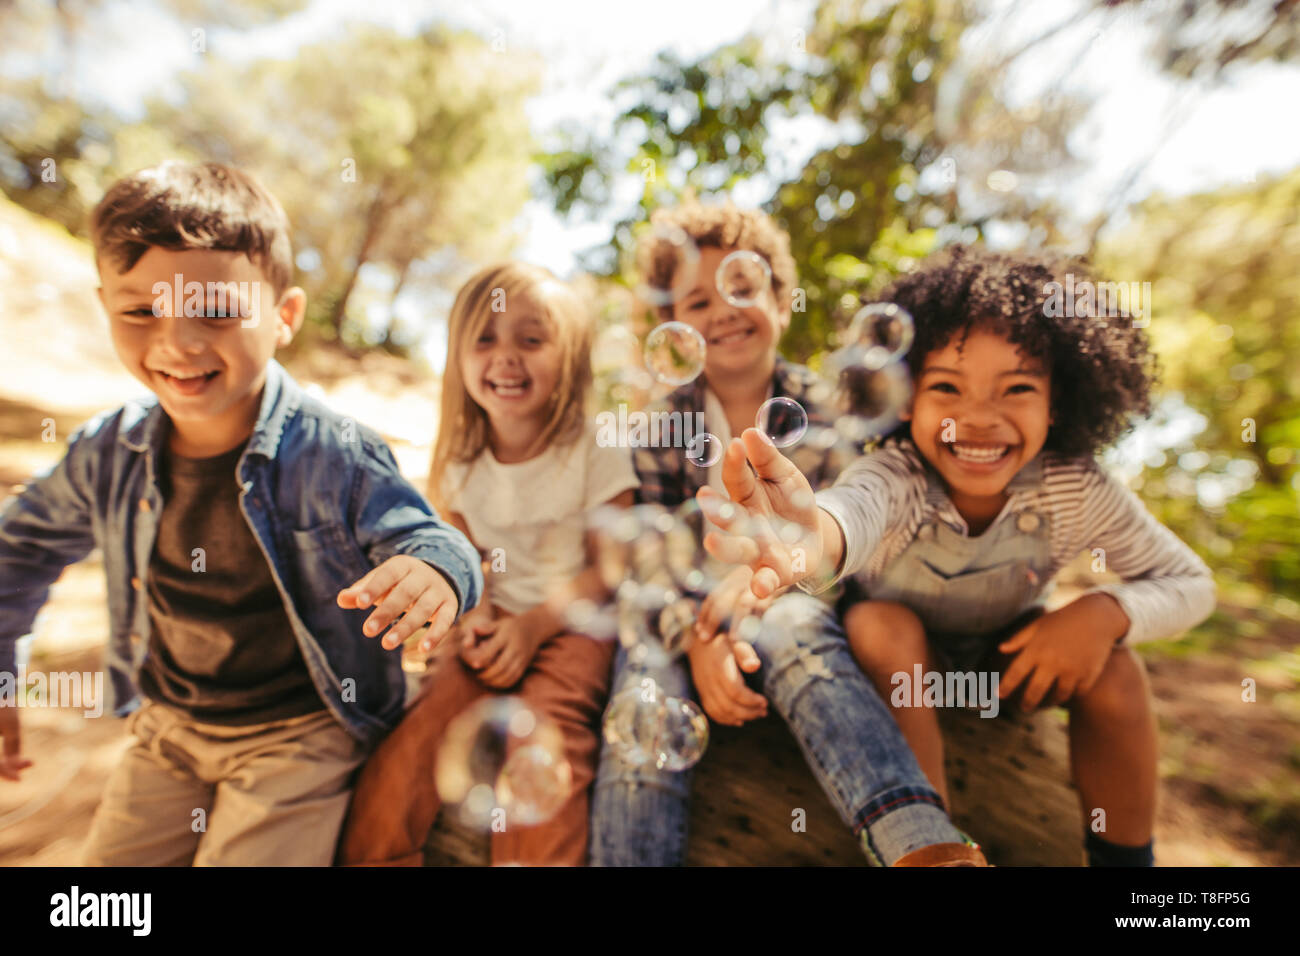 Group of children playing with soap bubbles outdoors. Friends trying to catch the bubbles. Stock Photo